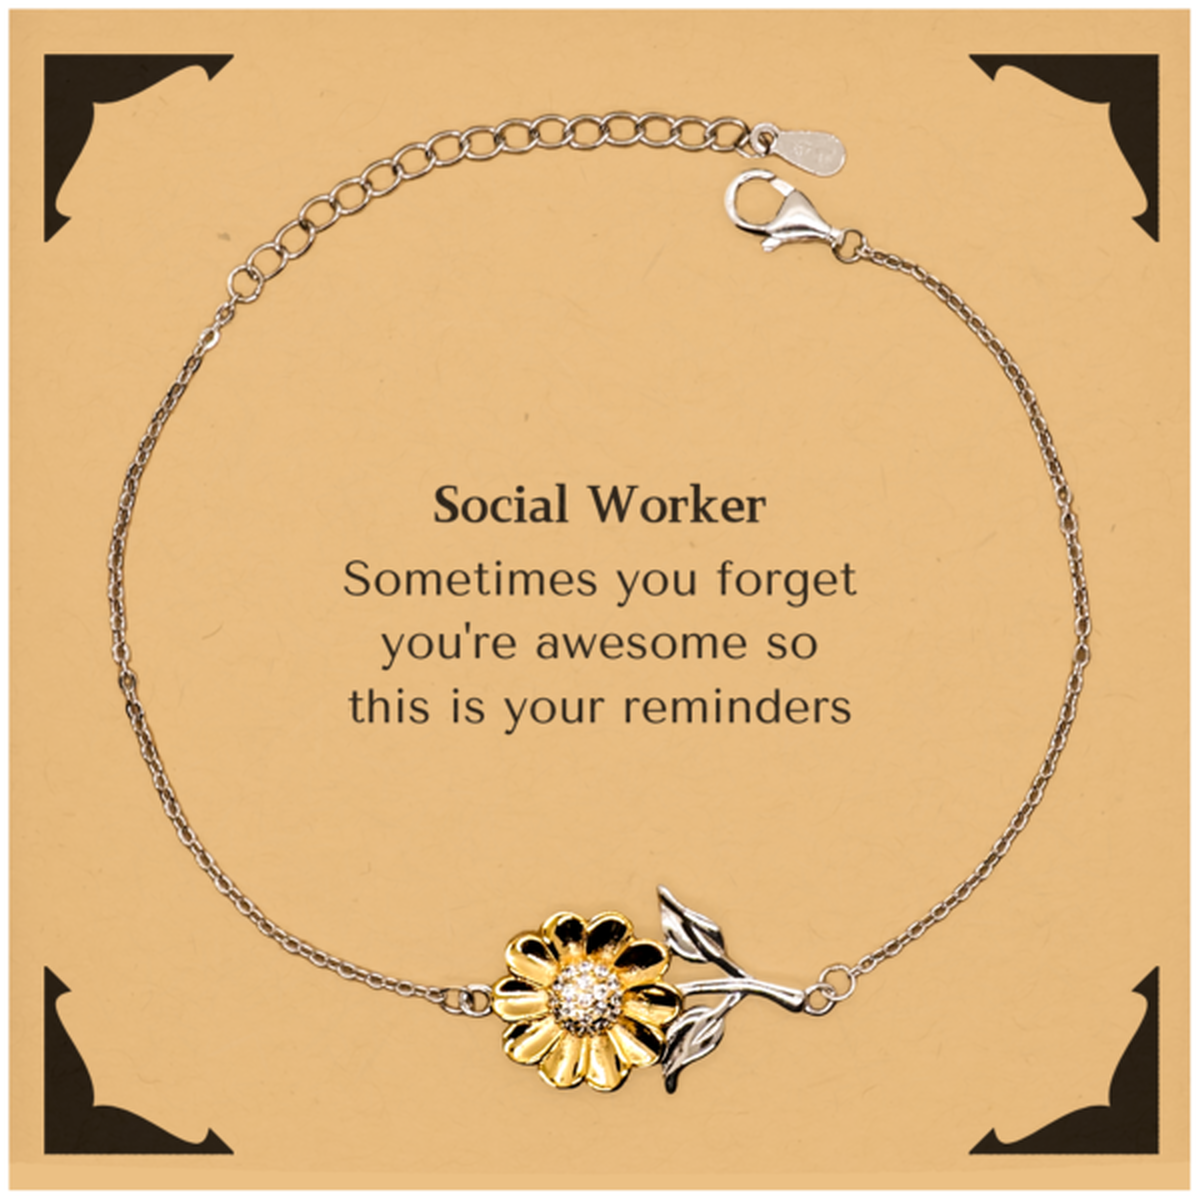 Sentimental Social Worker Sunflower Bracelet, Social Worker Sometimes you forget you're awesome so this is your reminders, Graduation Christmas Birthday Gifts for Social Worker, Men, Women, Coworkers